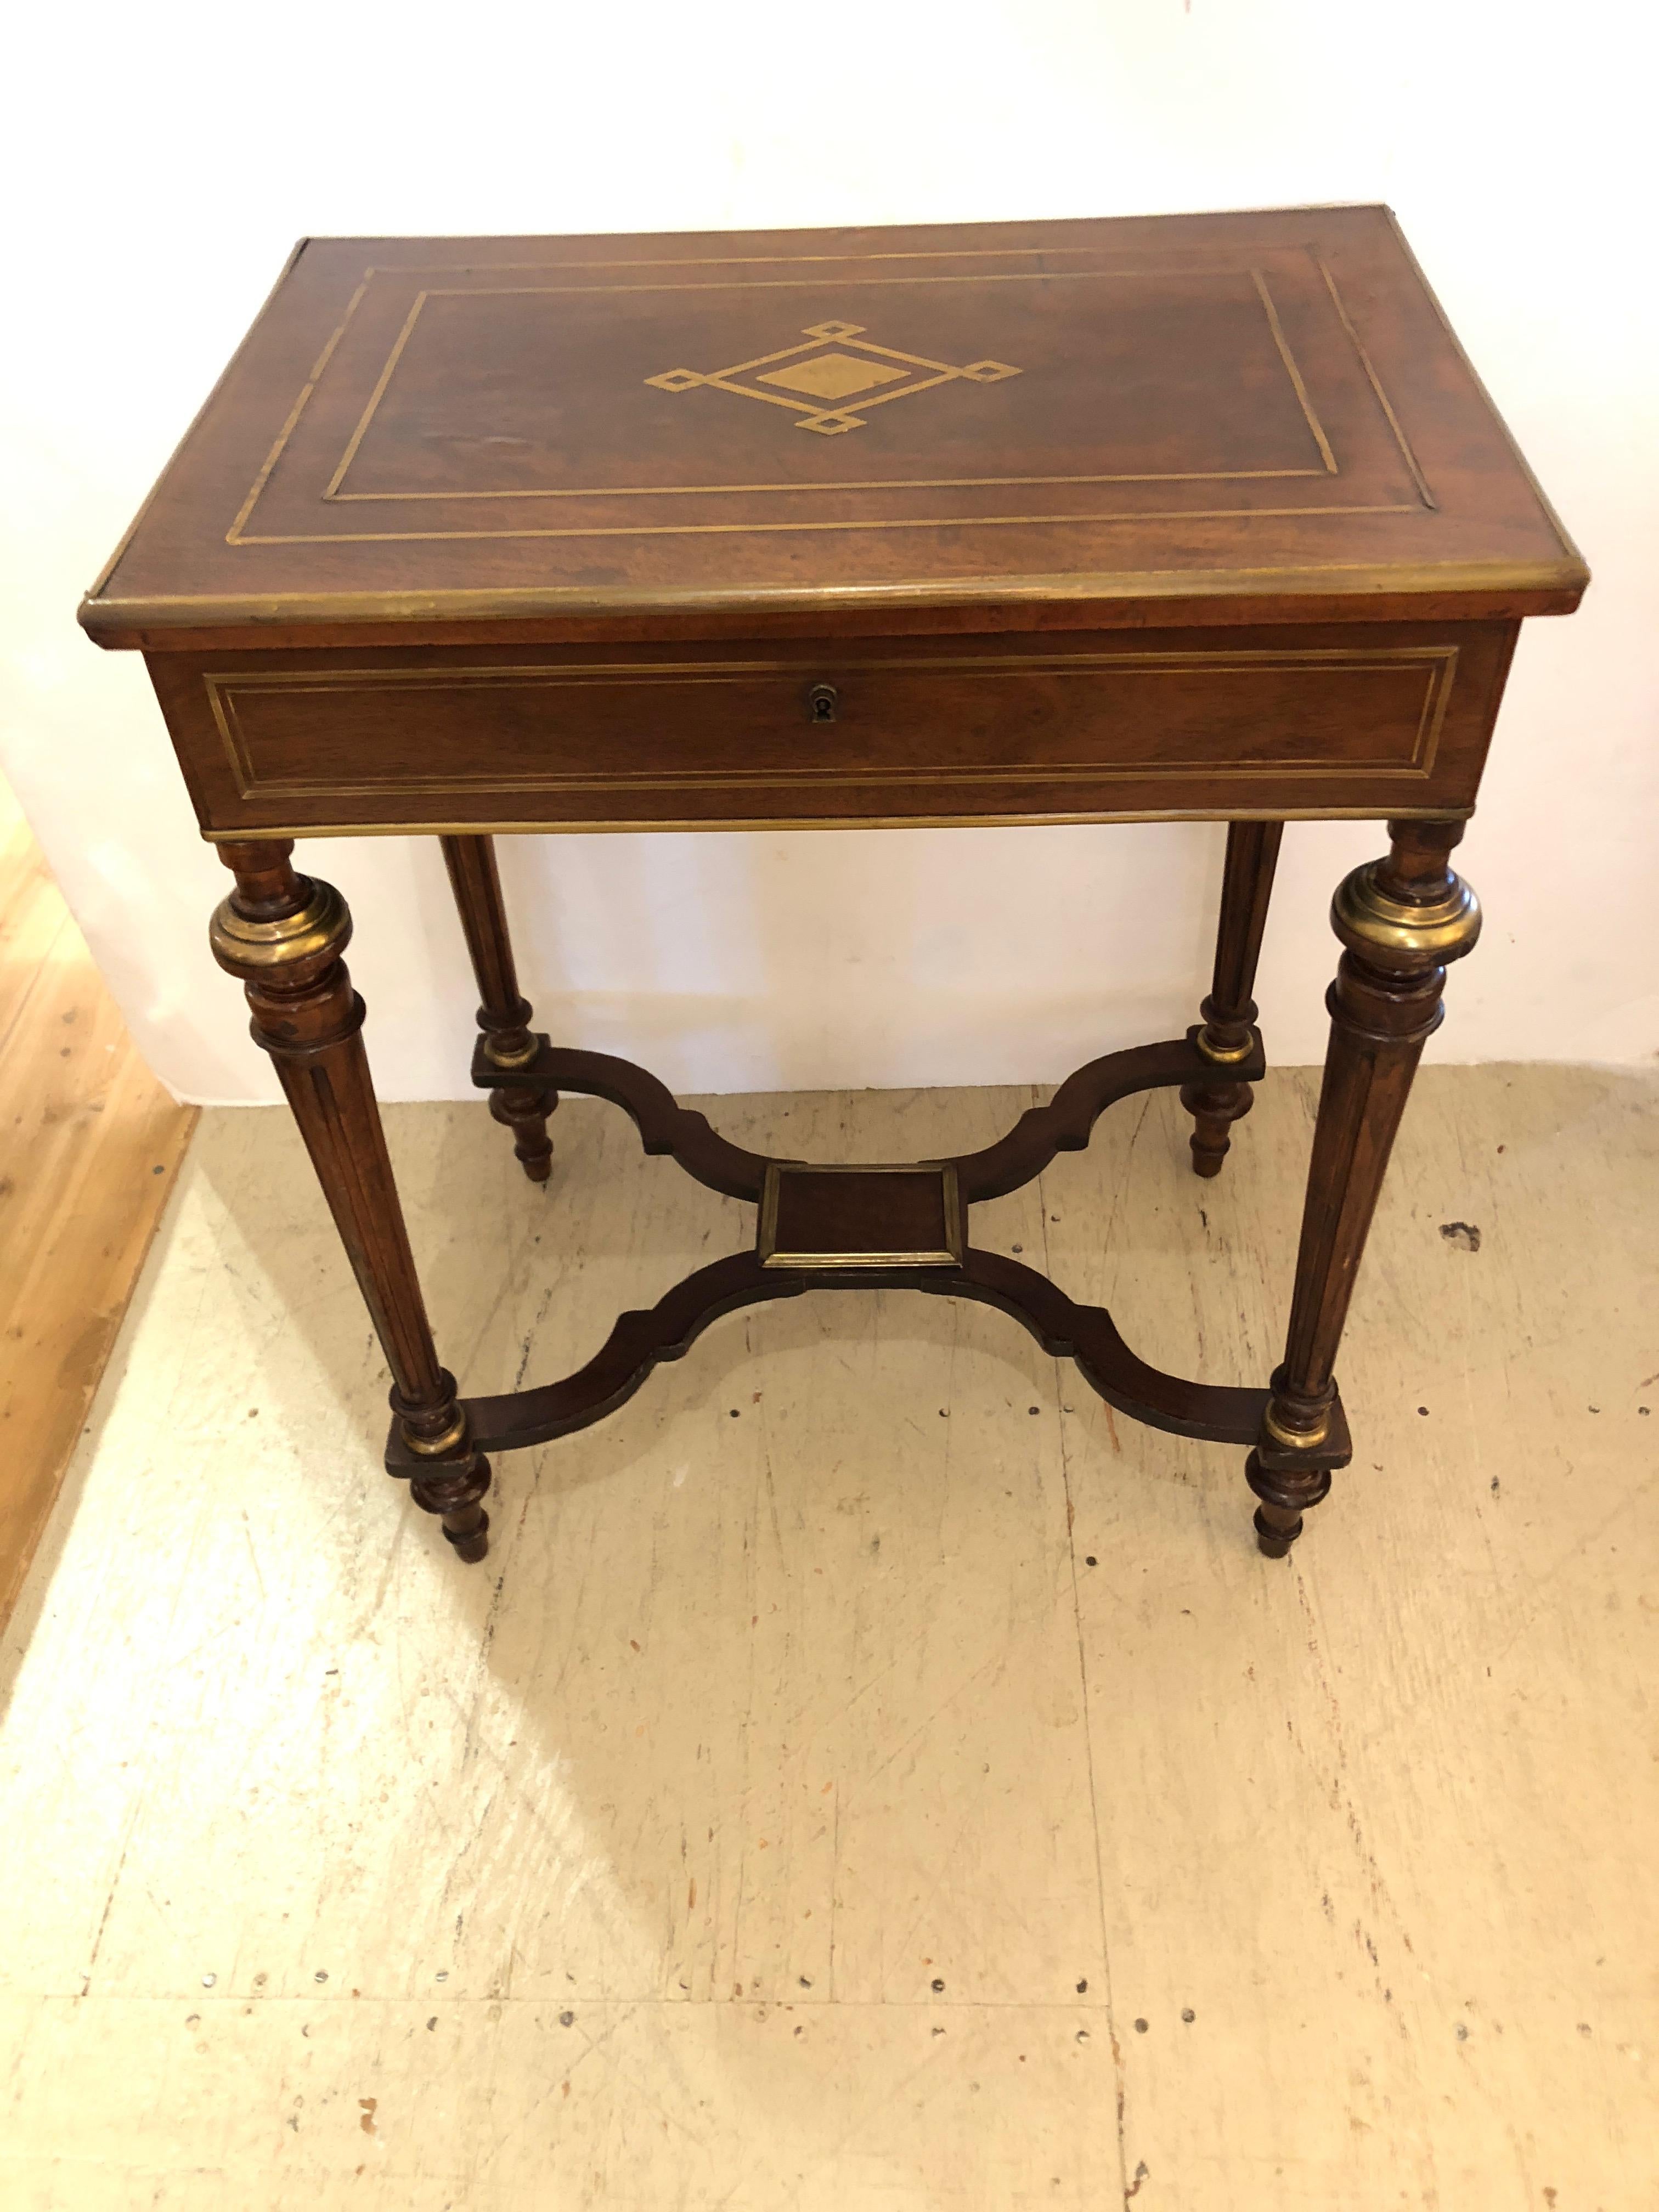 A gorgeous antique inlaid mahogany boule style table having pretty central medallion and brass adornments including on the legs and decorative stretcher at the bottom. The top opens to reveal compartments inside and a mirror.